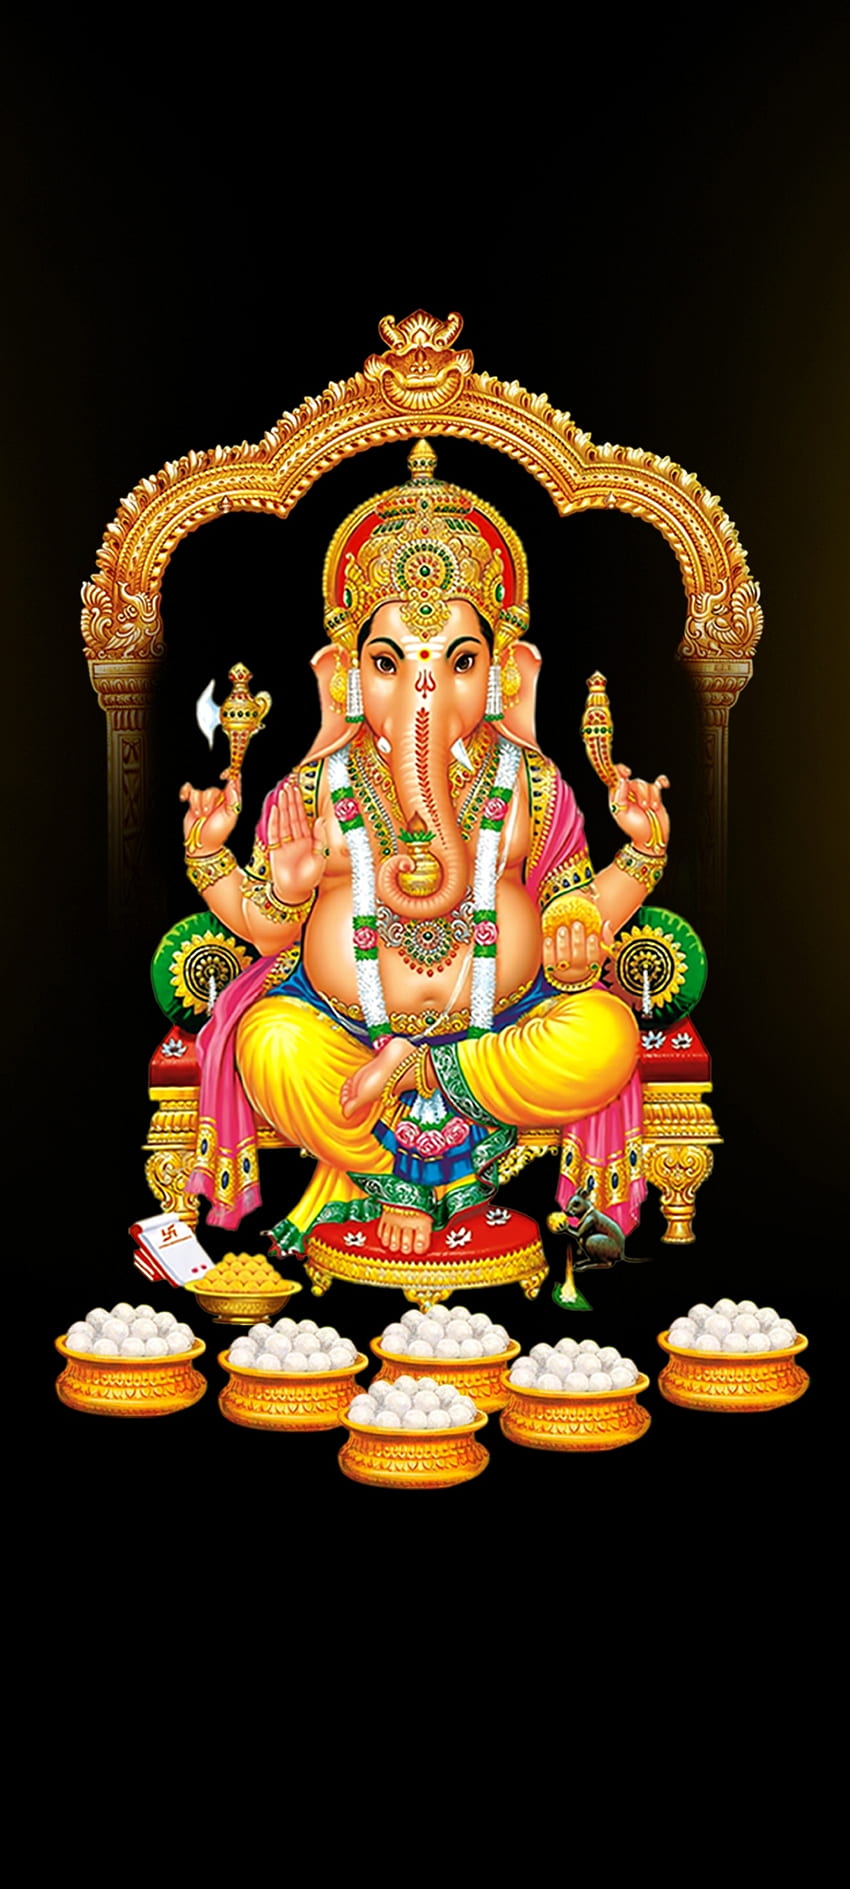 Ganesh Chaturthi 2021 Wishes, Quotes, Messages, Images, Photos, Posters,  Wallpapers HD, Gifs to Share with Friends – Version Weekly